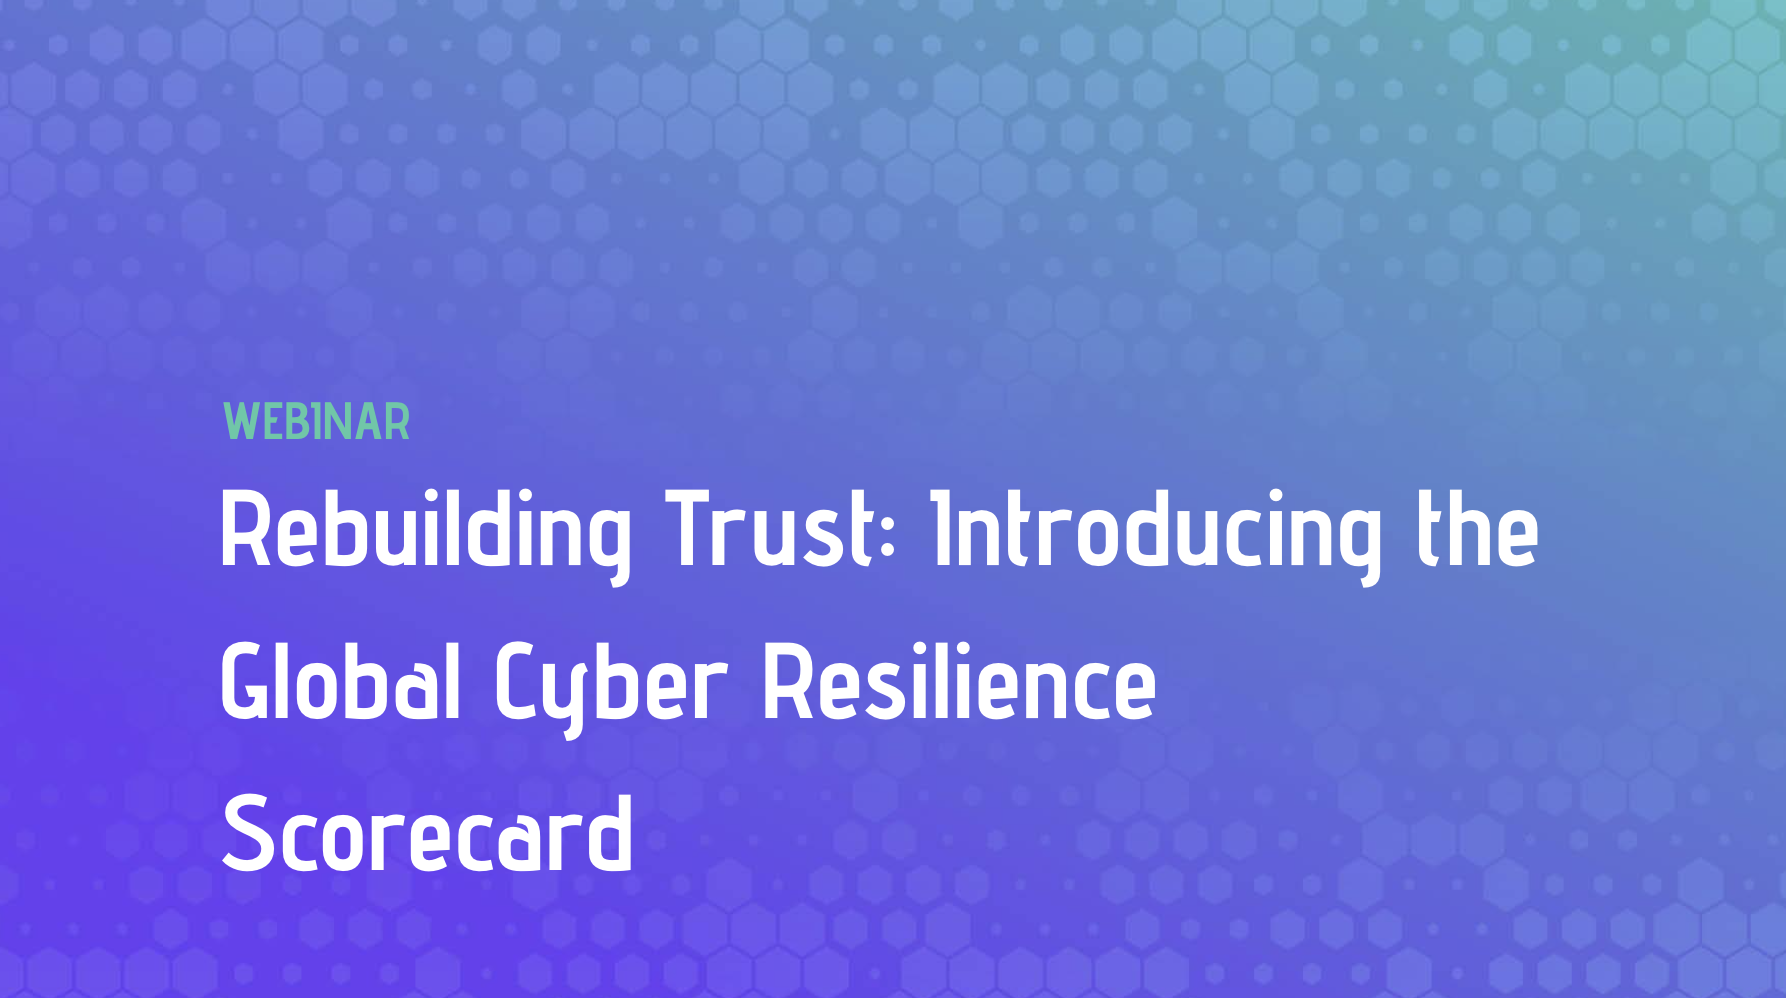 Rebuilding Trust: Introducing the Global Cyber Resilience Scorecard